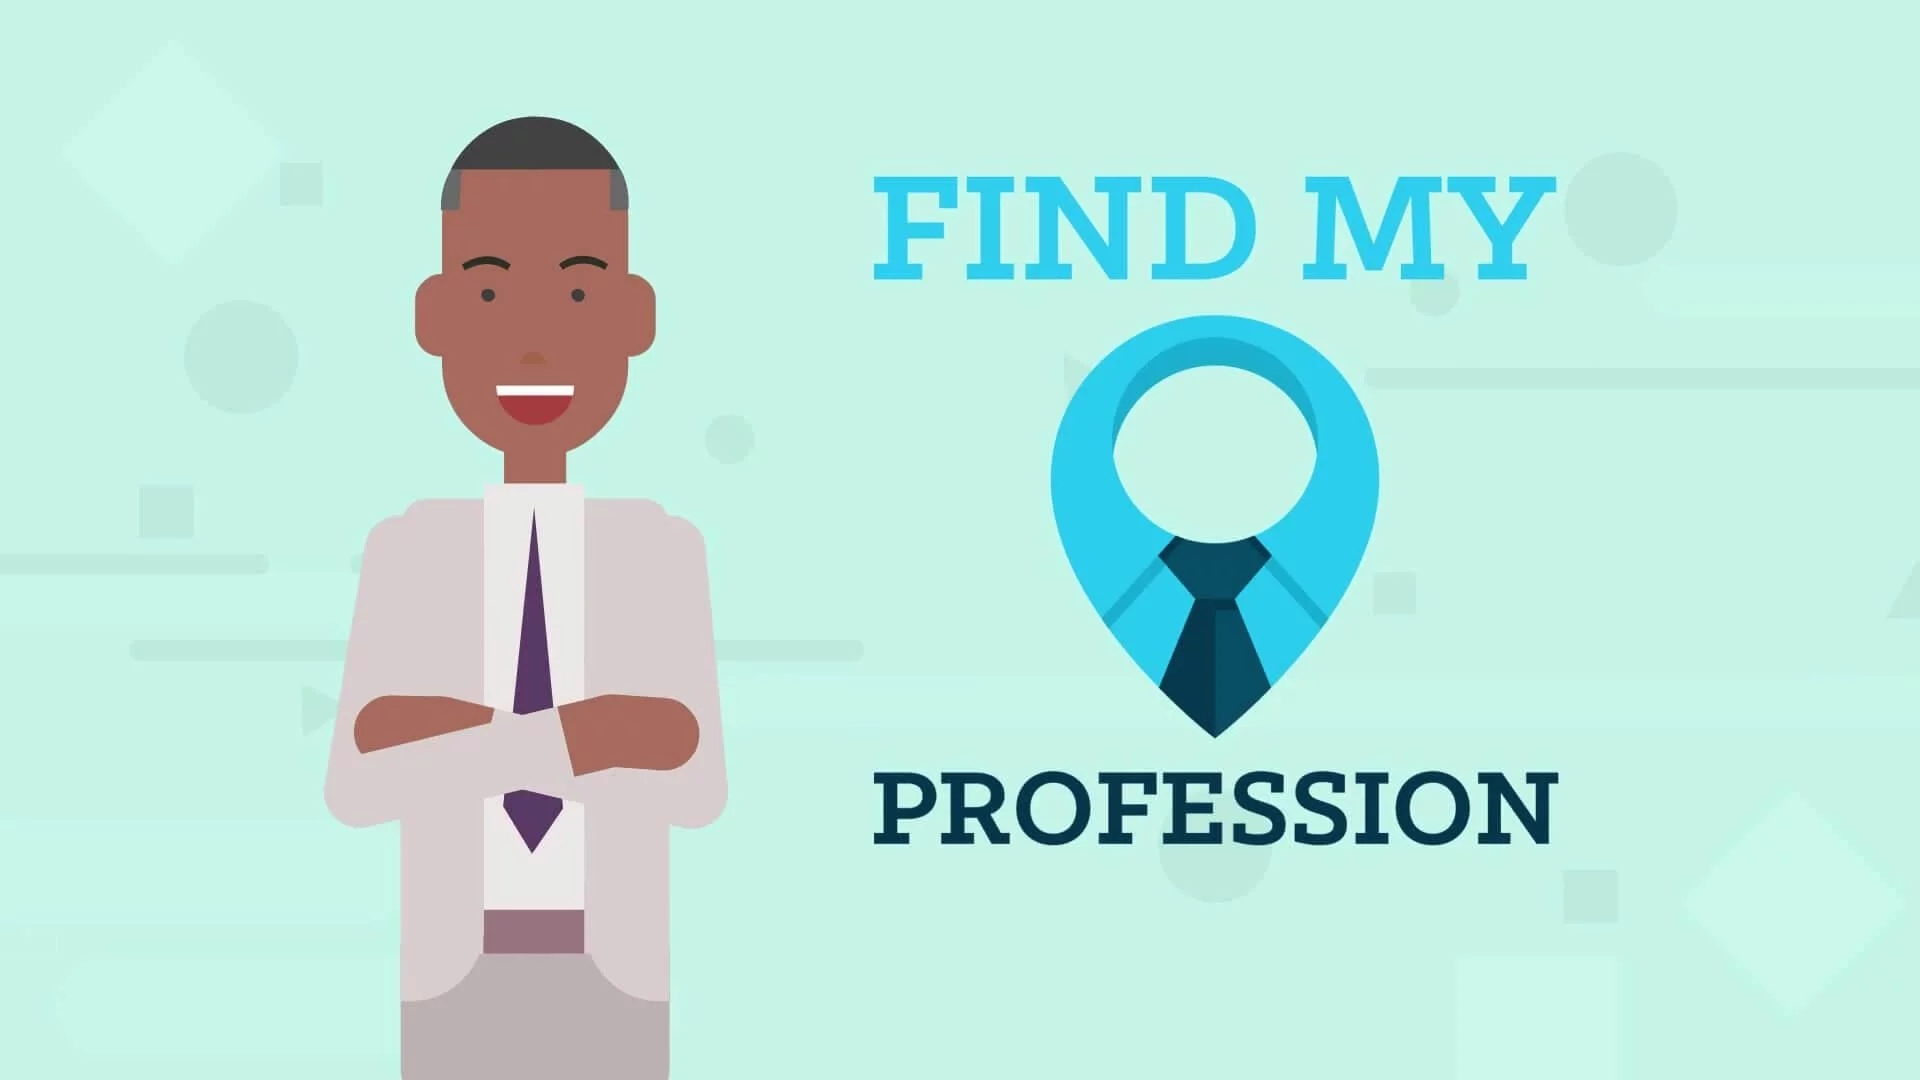 Reverse Recruiting and Resume Writing Services: Find My Profession Reviews